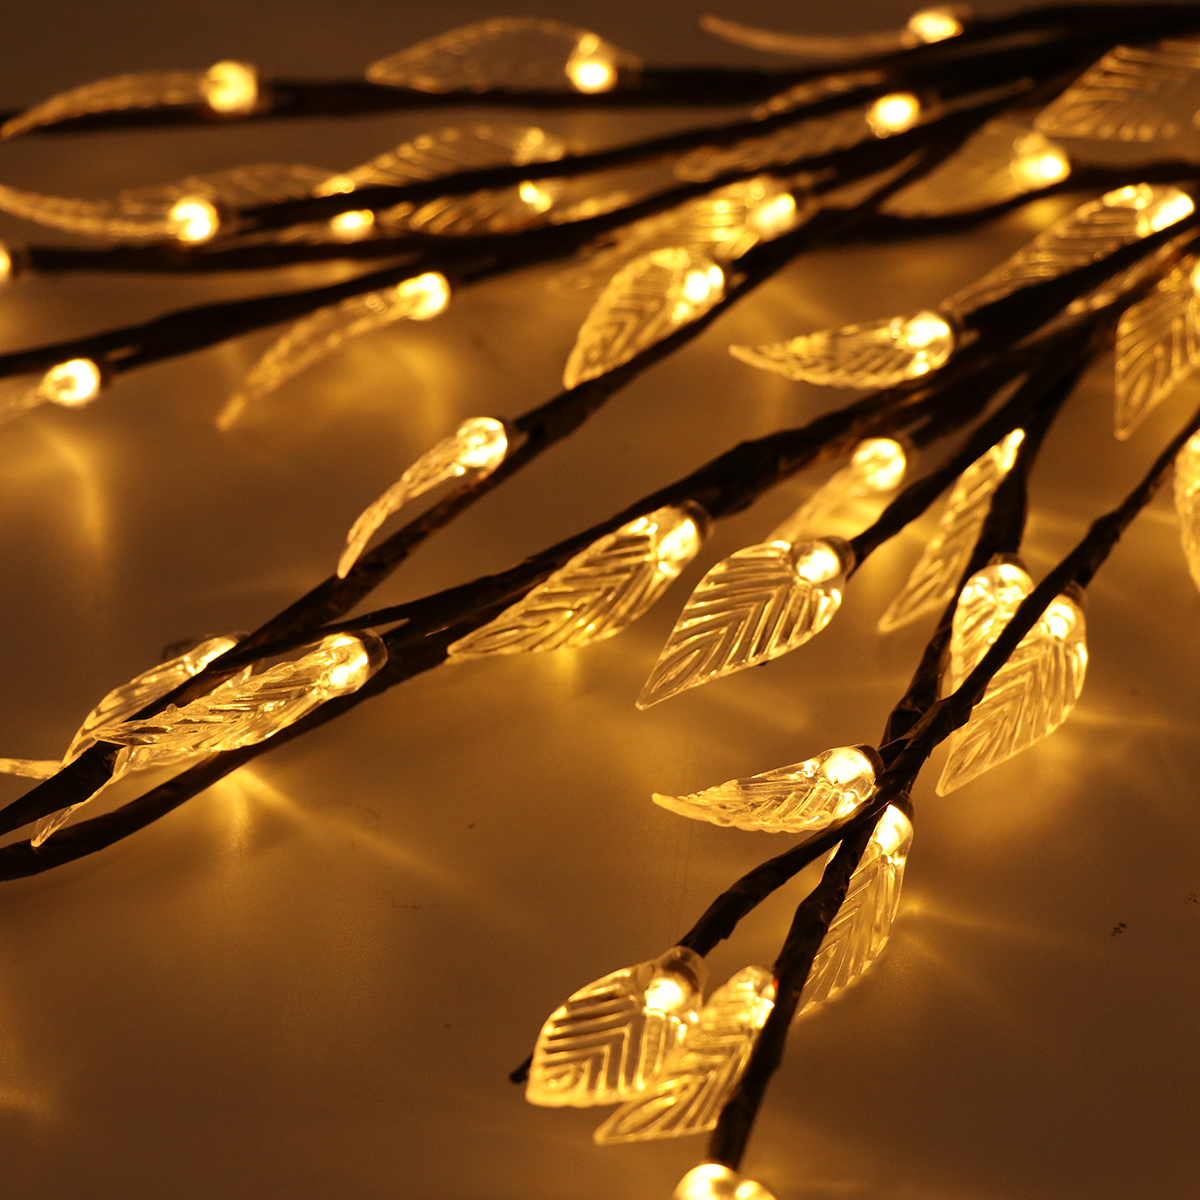 3PCS-LED-Solar-Powered-Lawn-Light-Tree-Branches-Ground-Lamp-Outdoor-Garden-Yard-Lighting-Decoration-1735081-10